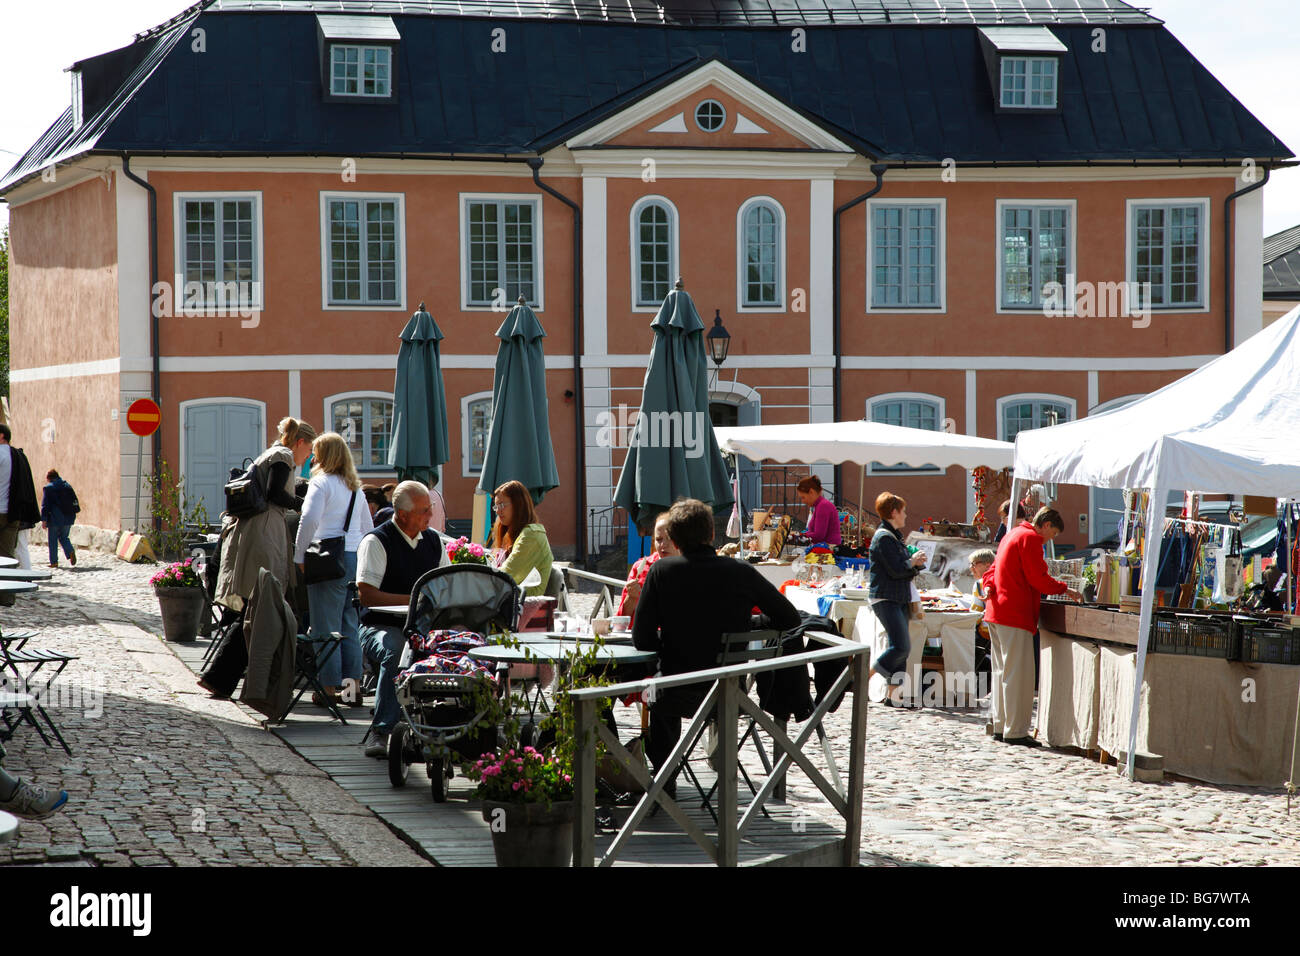 Finland Southern Finland Eastern Uusimaa Porvoo Market Square Old Town Hall Square Town Hall Market Local Handicrafts Stalls Stock Photo